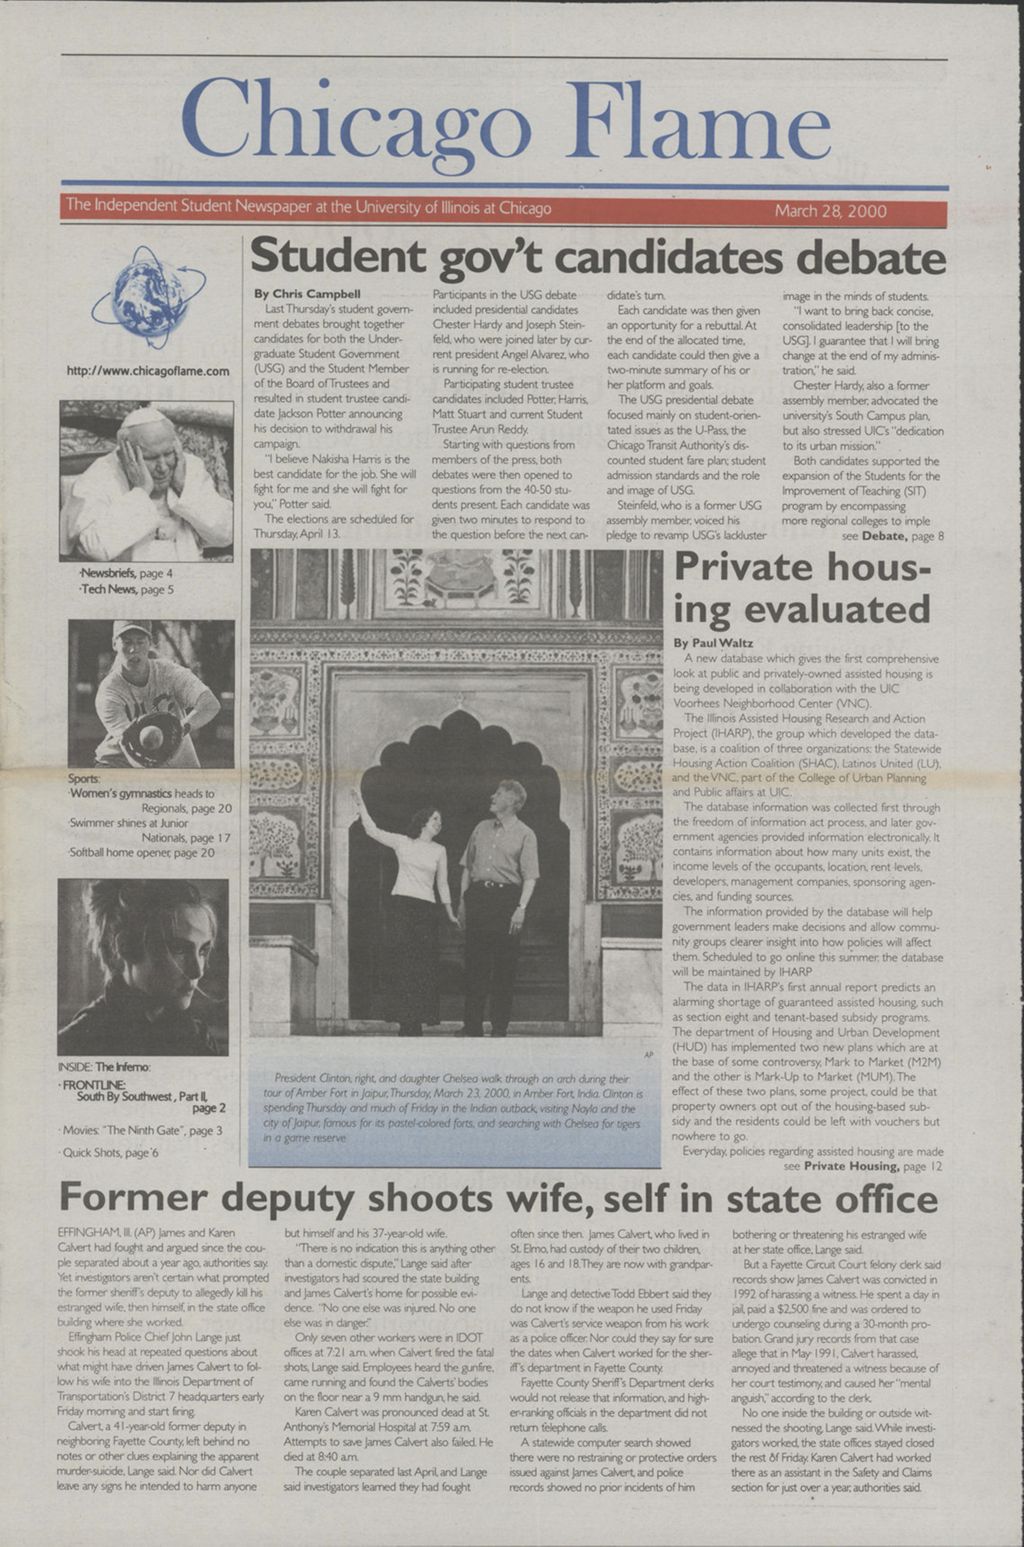 Miniature of Chicago Flame (March 28, 2000)